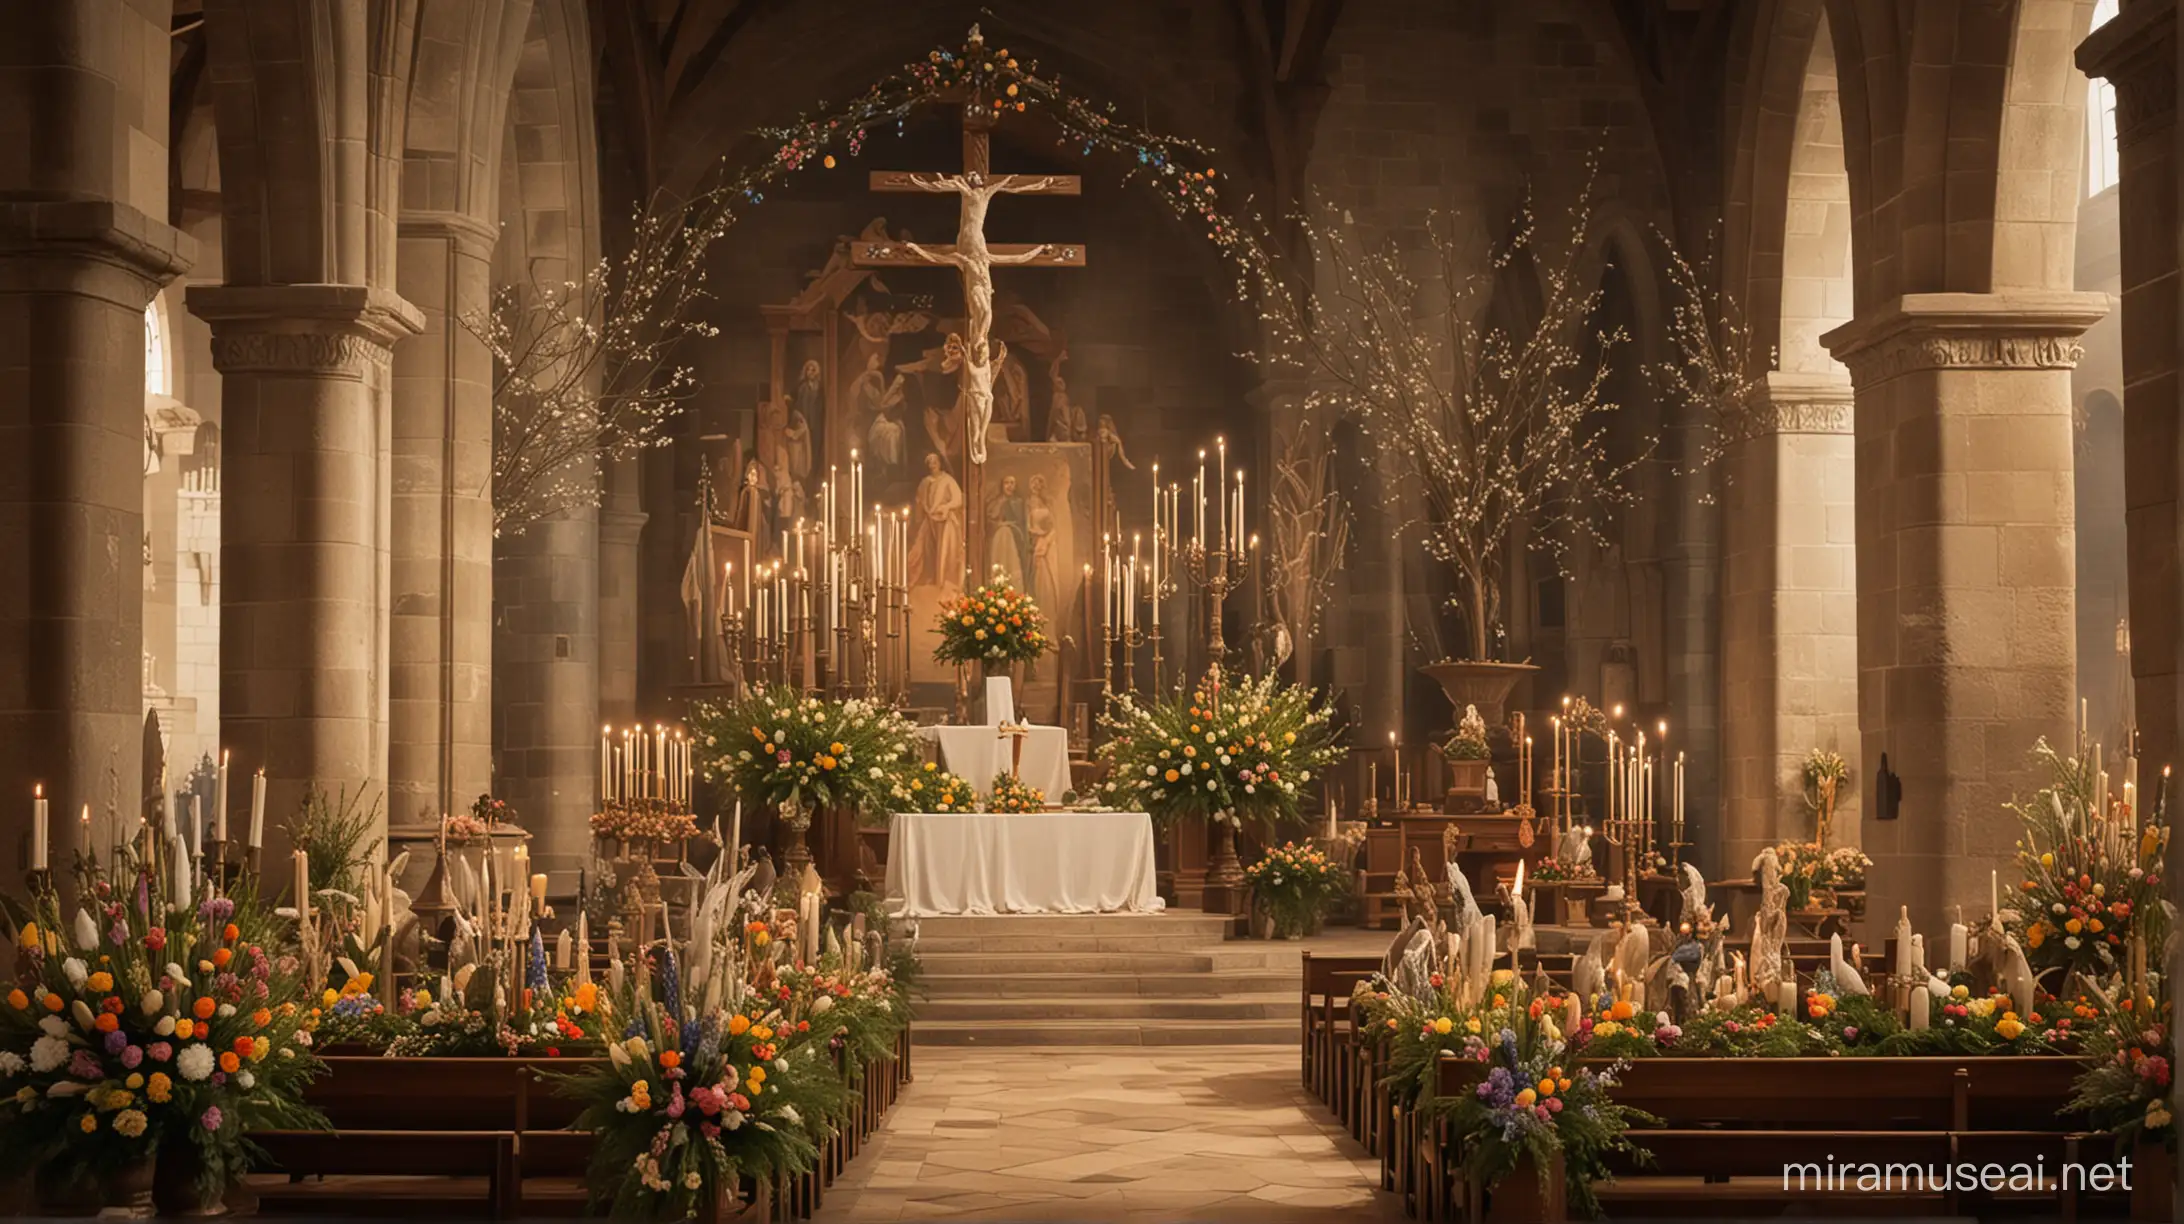 Generate an image depicting Christians worshipping in a church adorned with Easter decorations, juxtaposed with historical imagery of pagan rituals honoring the fertility goddess Eostre.